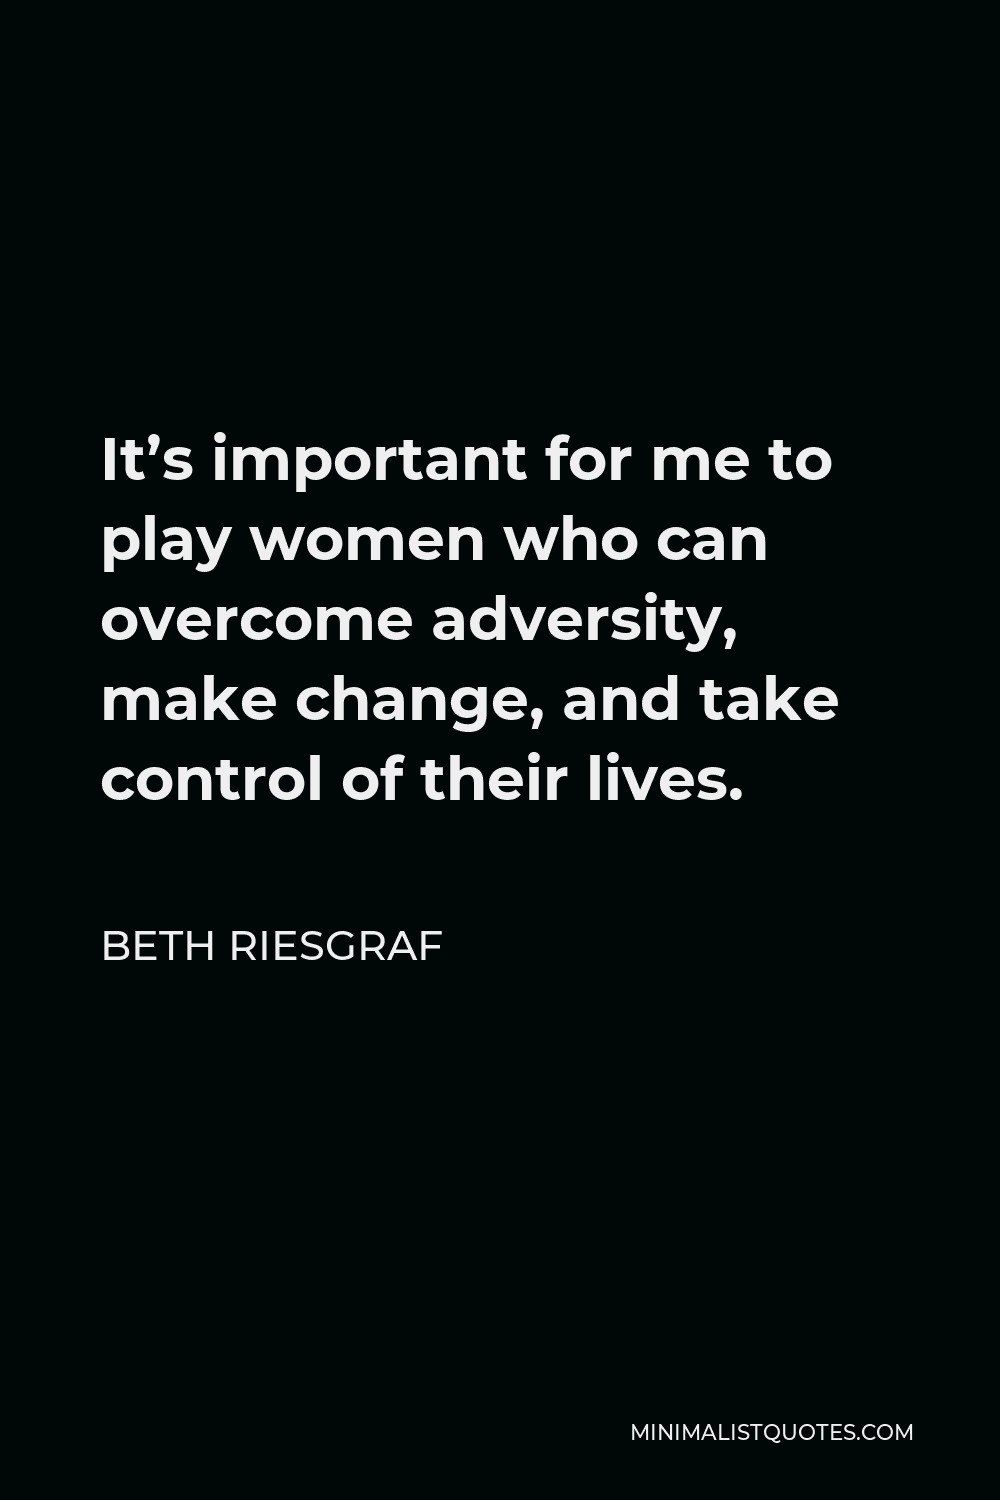 Beth Riesgraf Quote - It’s important for me to play women who can overcome adversity, make change, and take control of their lives.